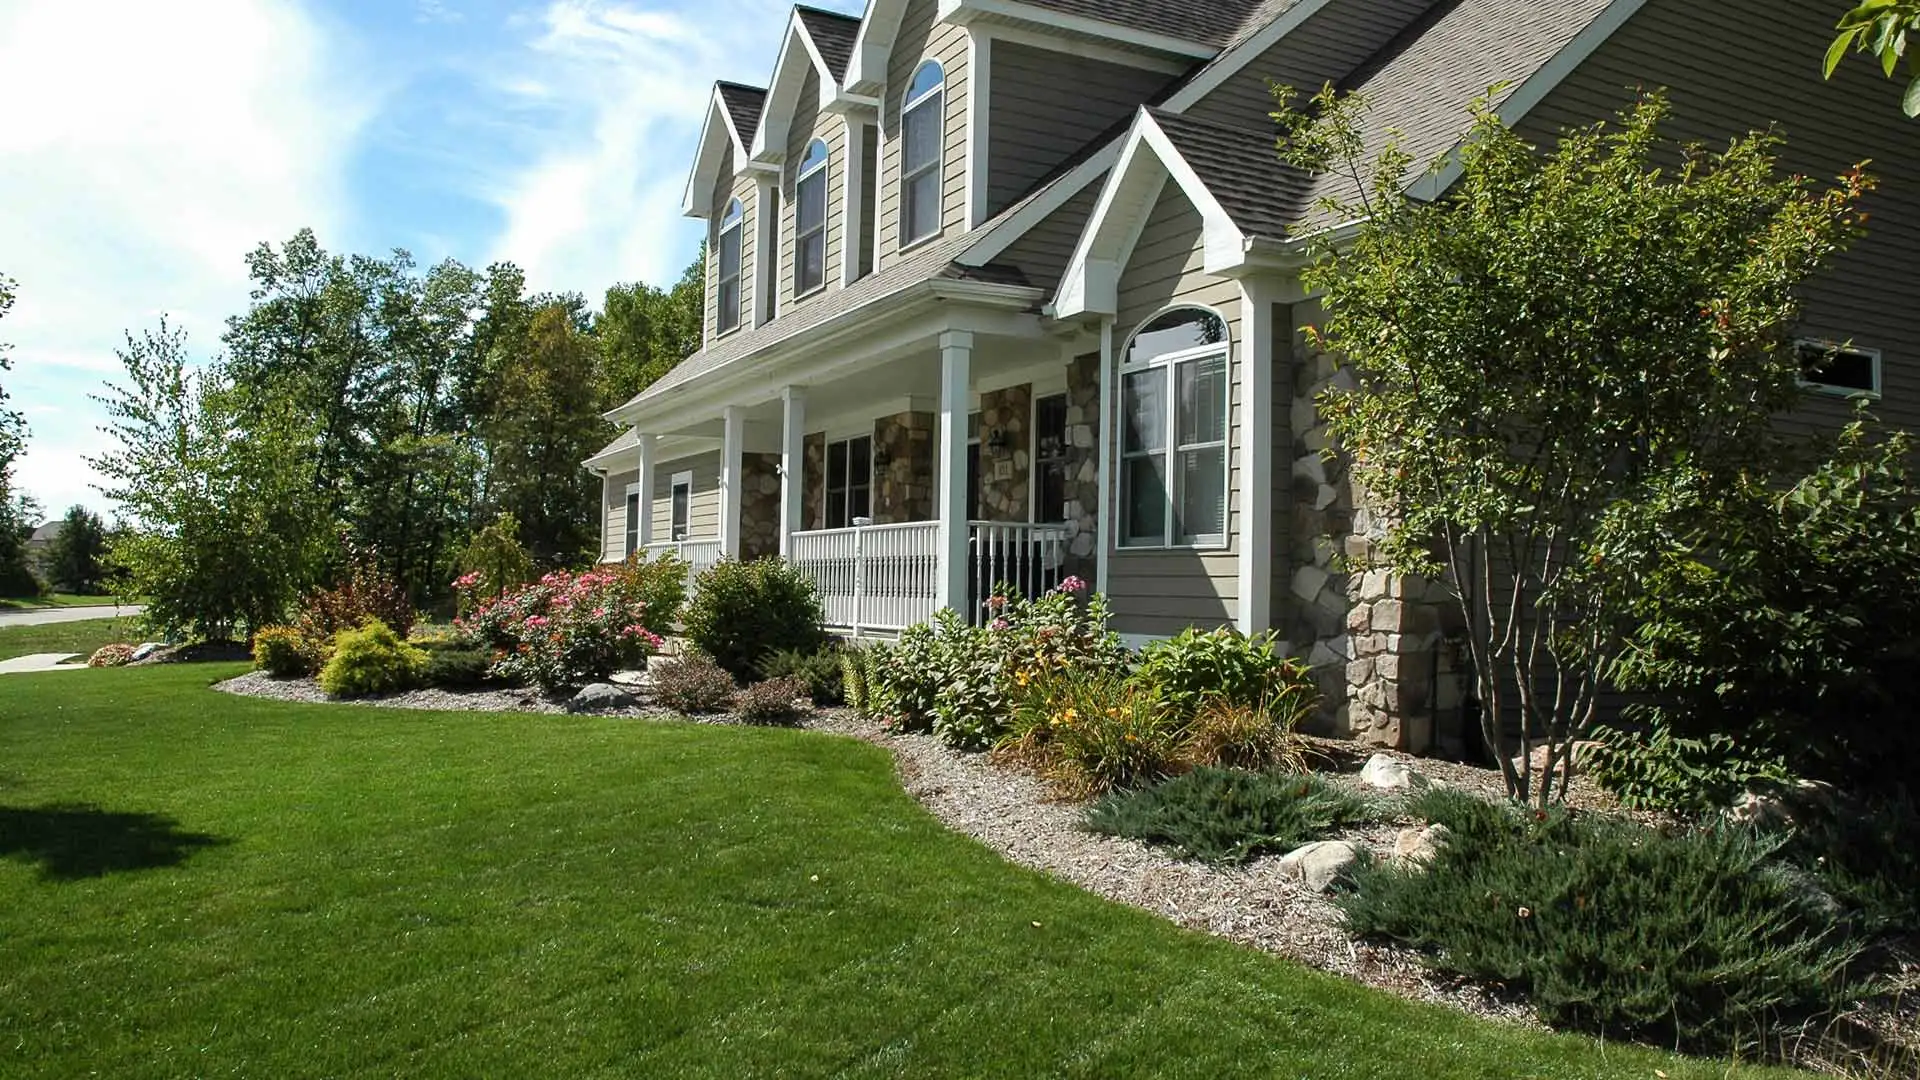 Home with maintained landscape bed in Okemos, MI.